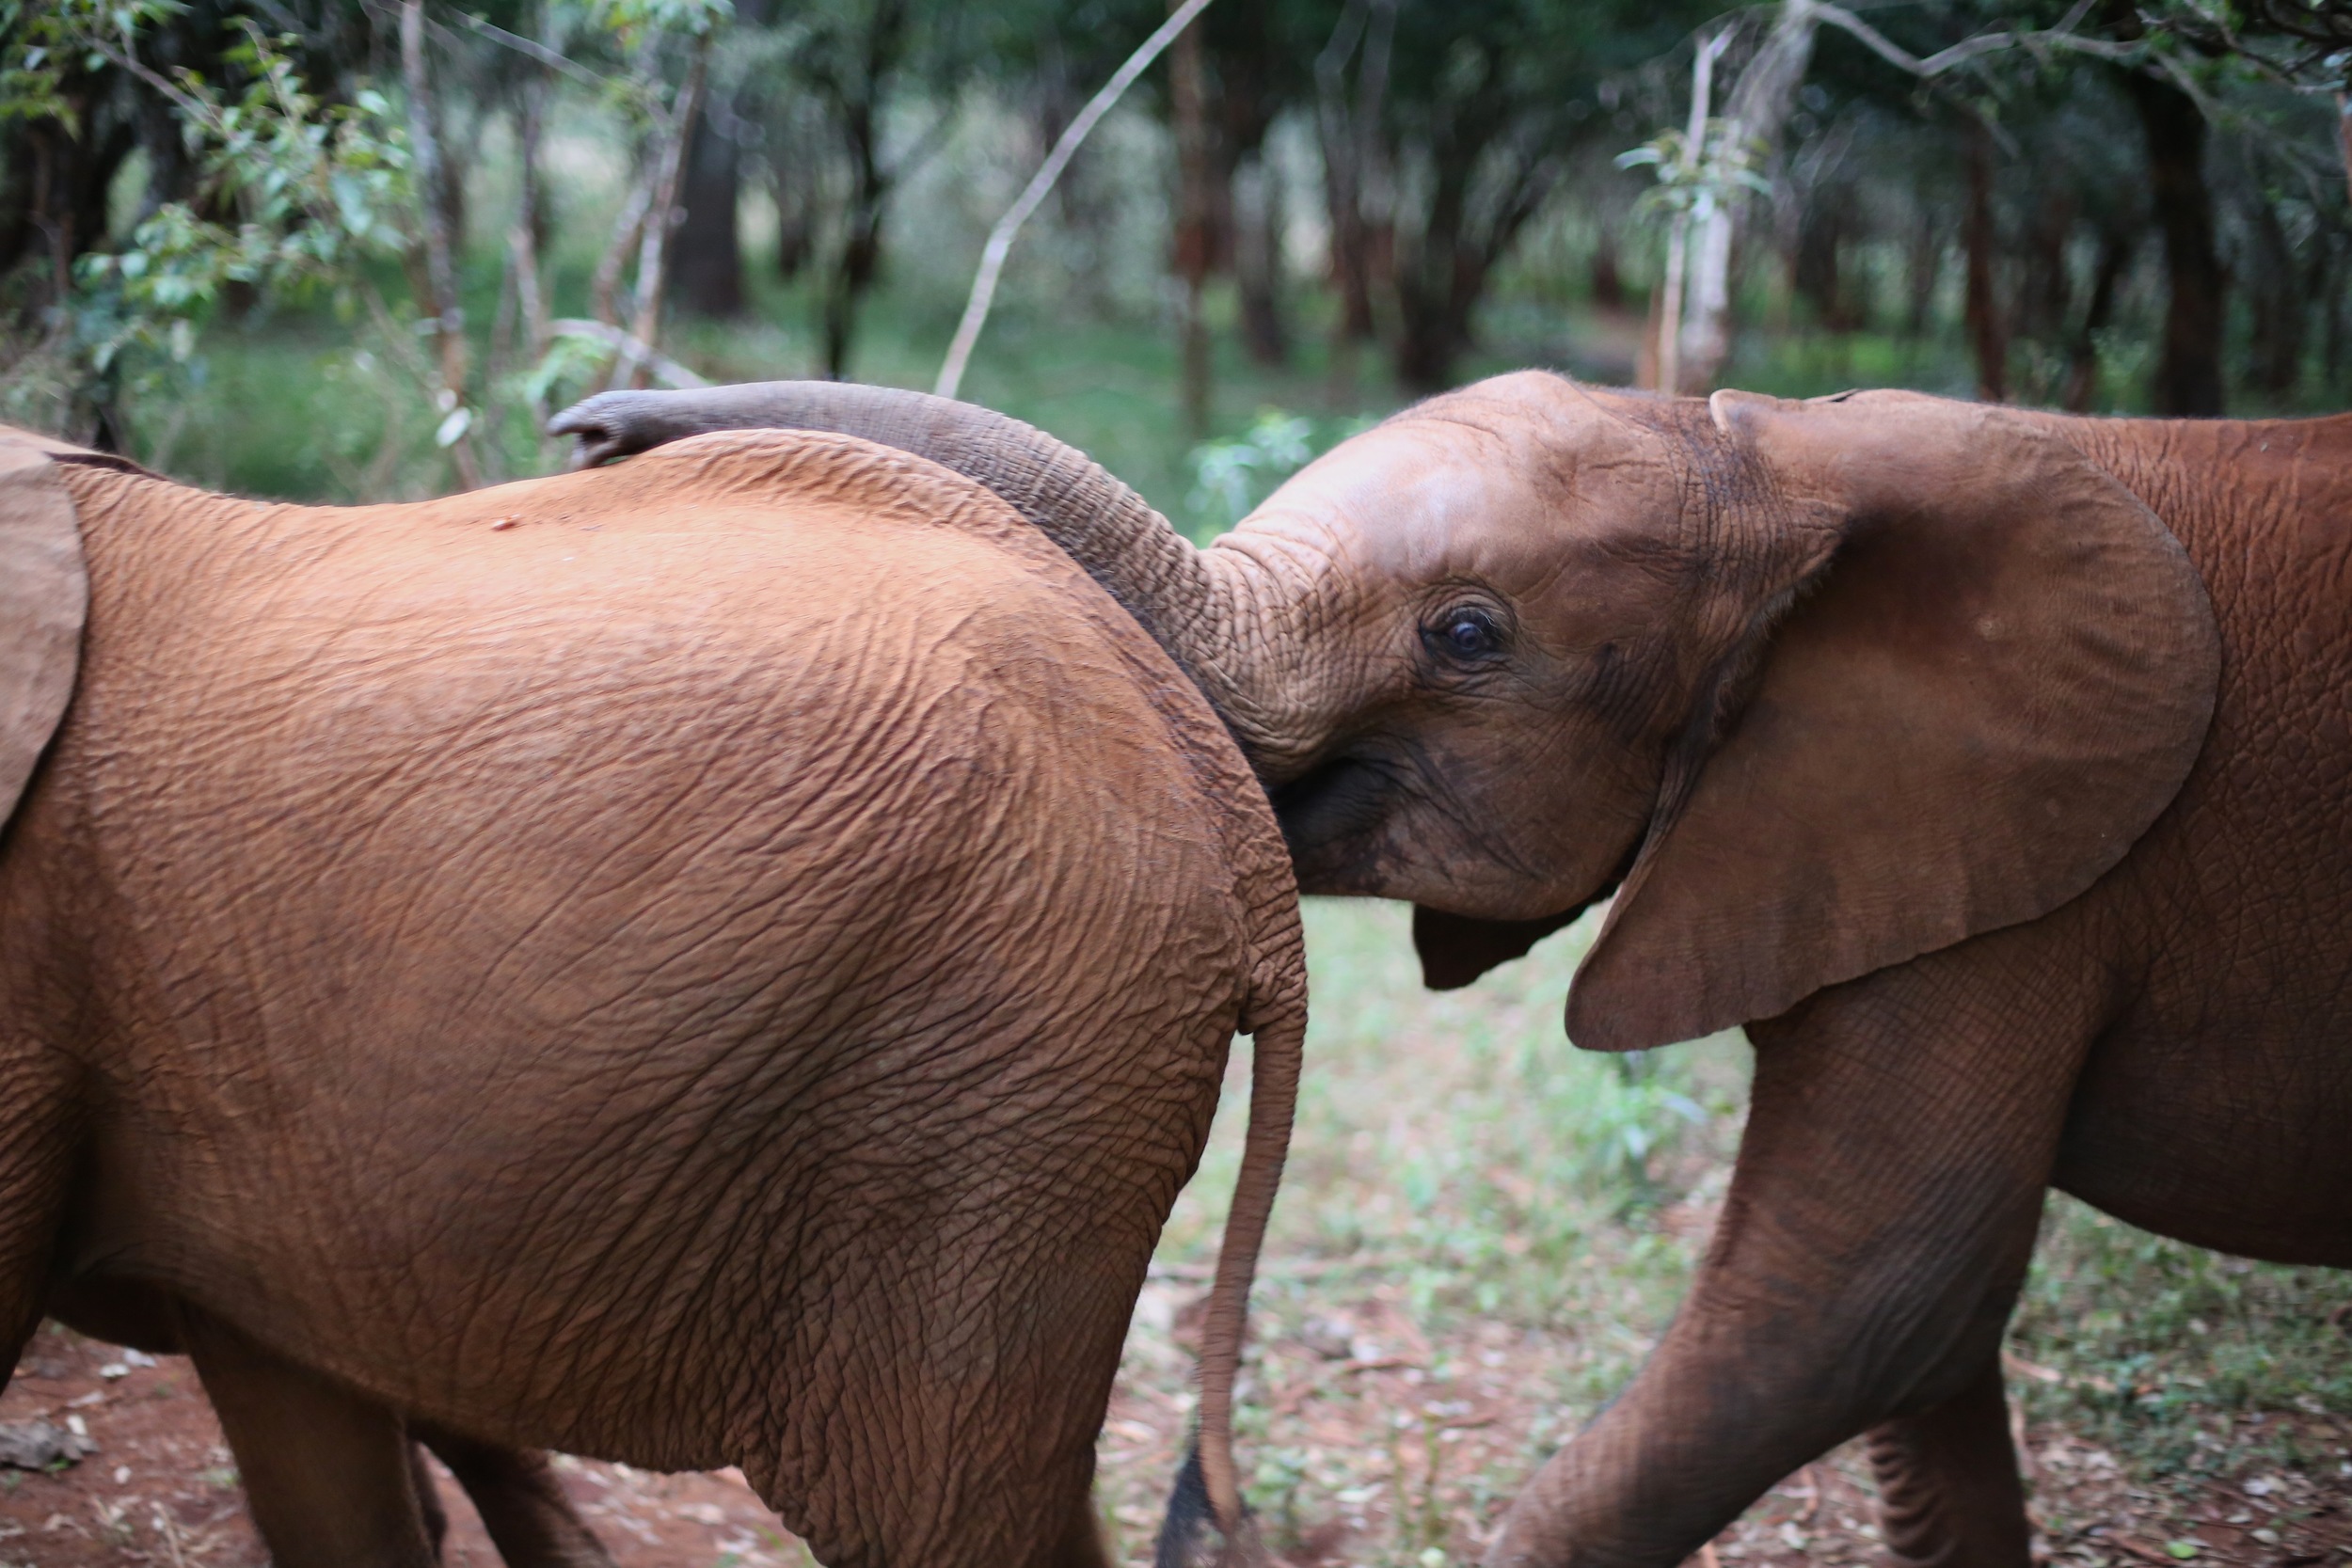 Every morning the orphaned elephants are led out to Nairobi national park, where they spend the day playing and grazing